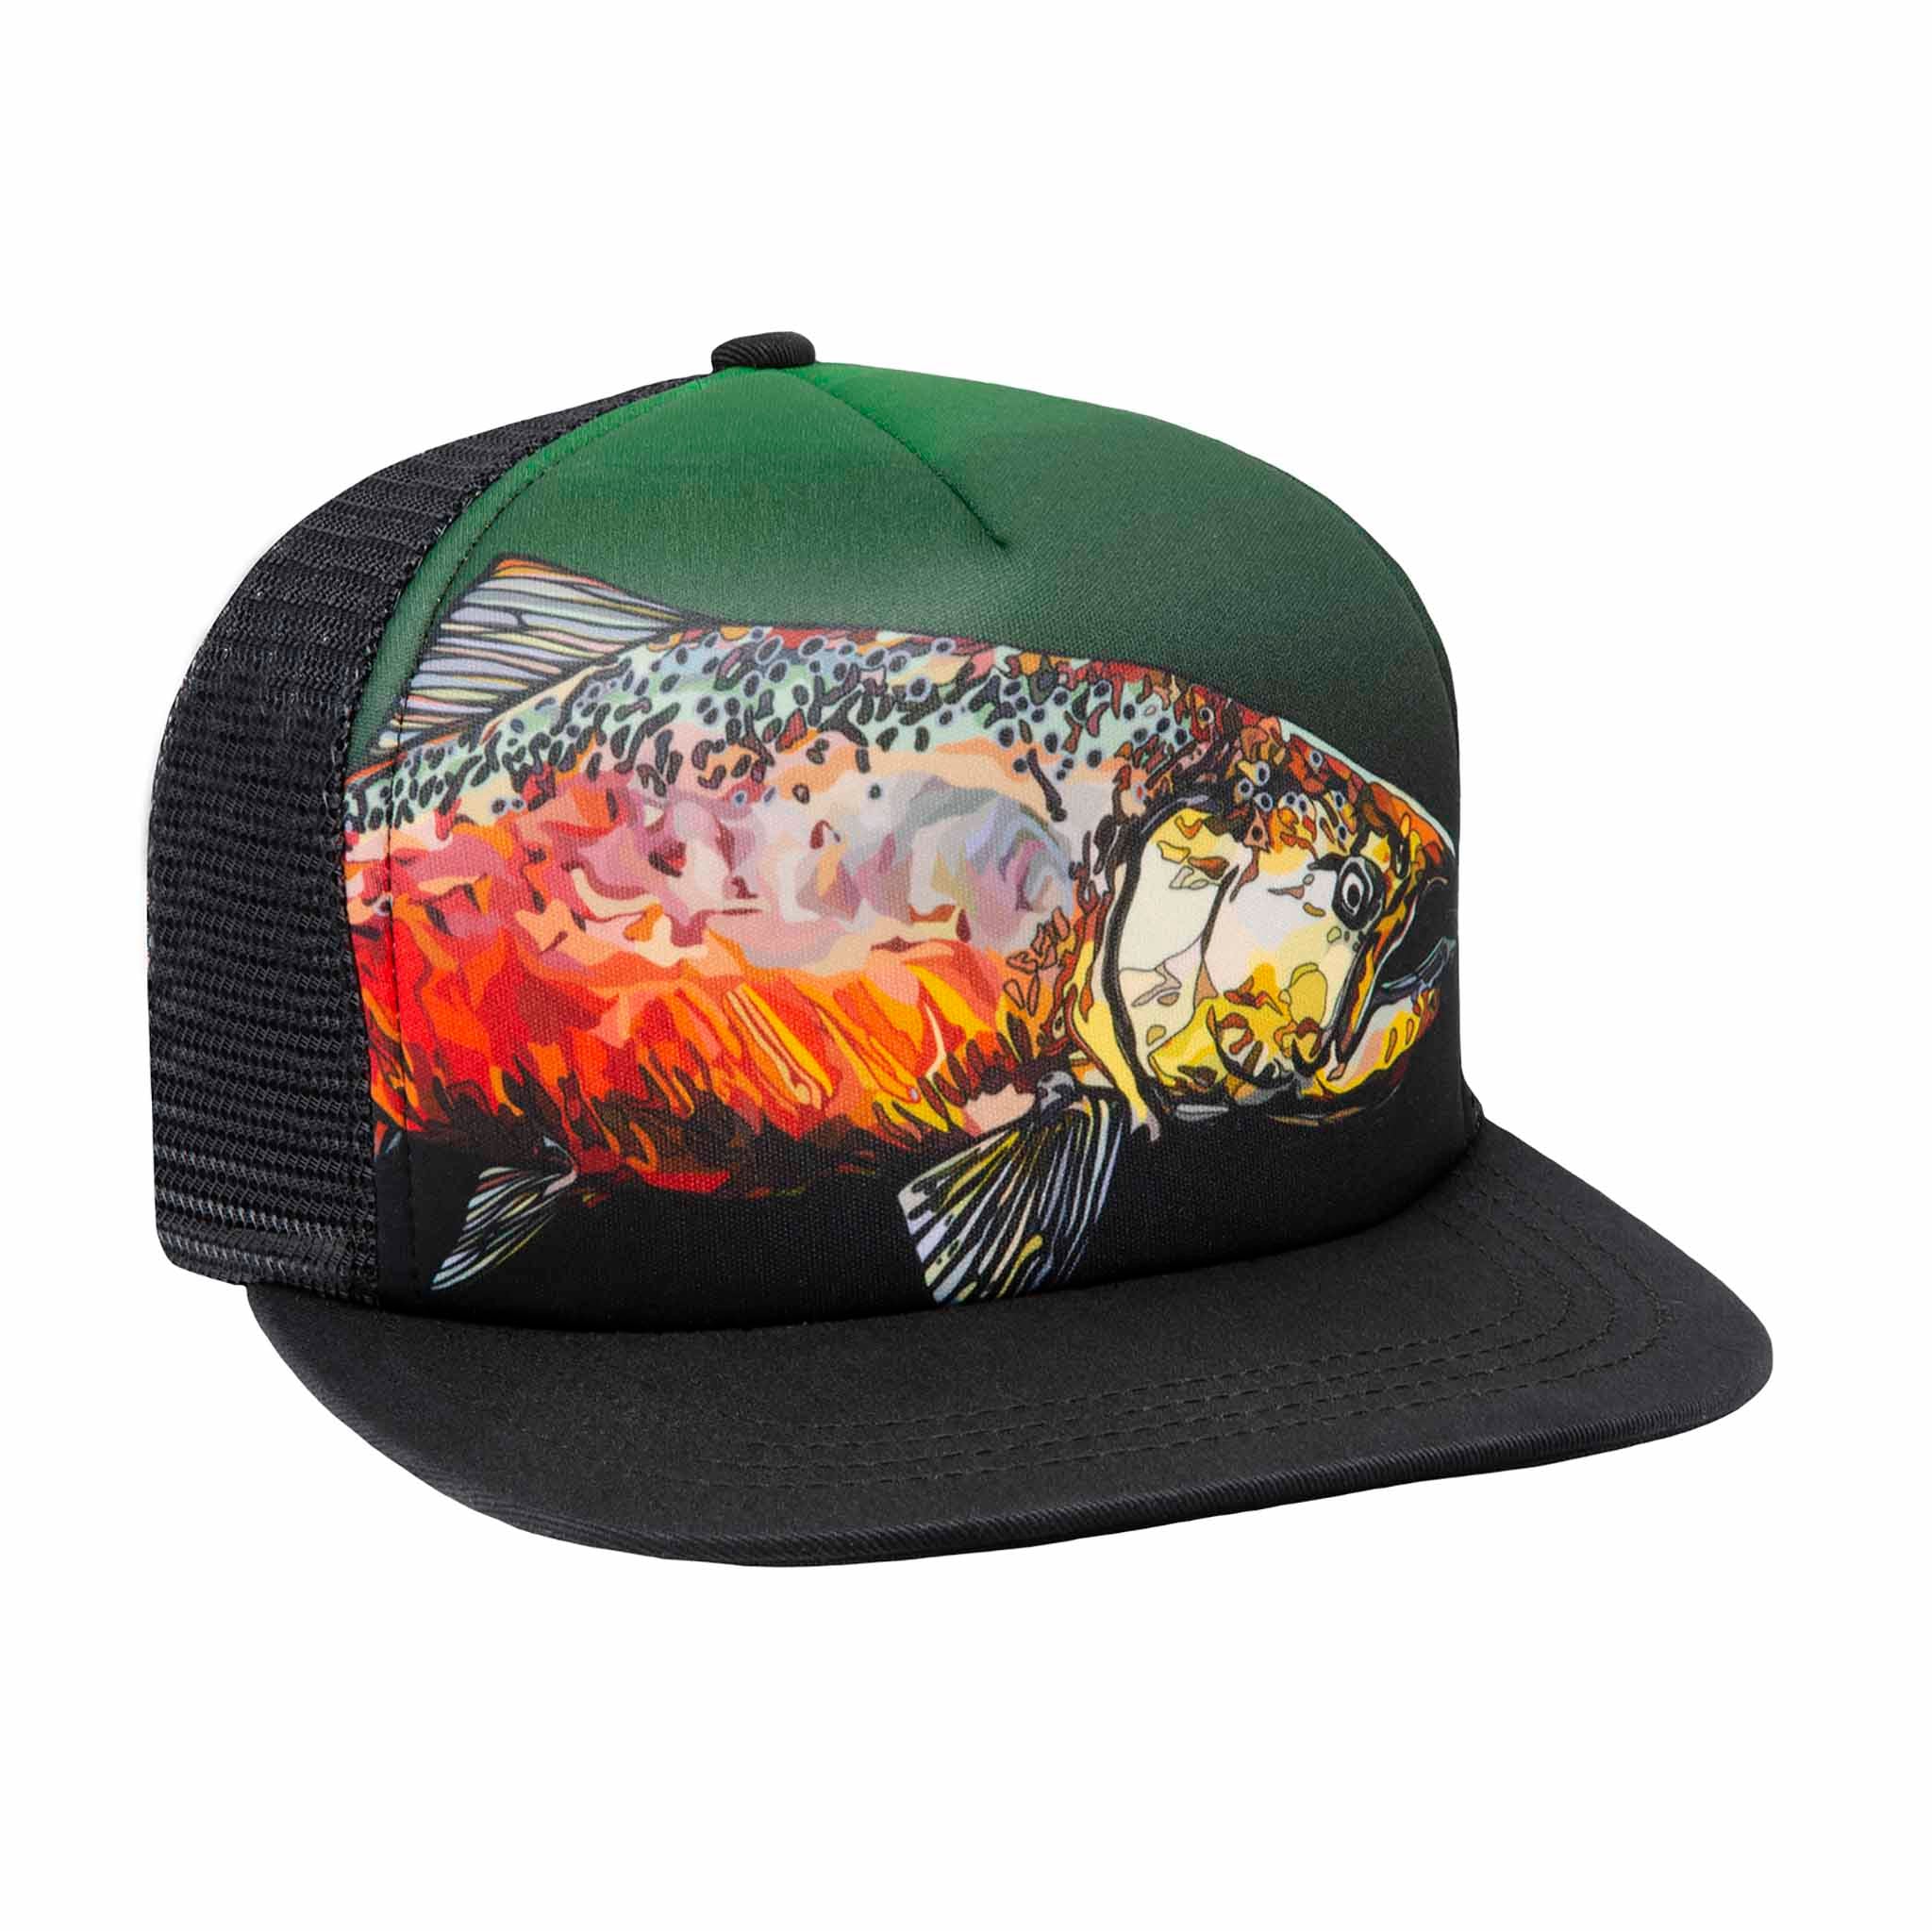 Local Crowns Fish Fish Collection USA Snapback Trucker Fishing